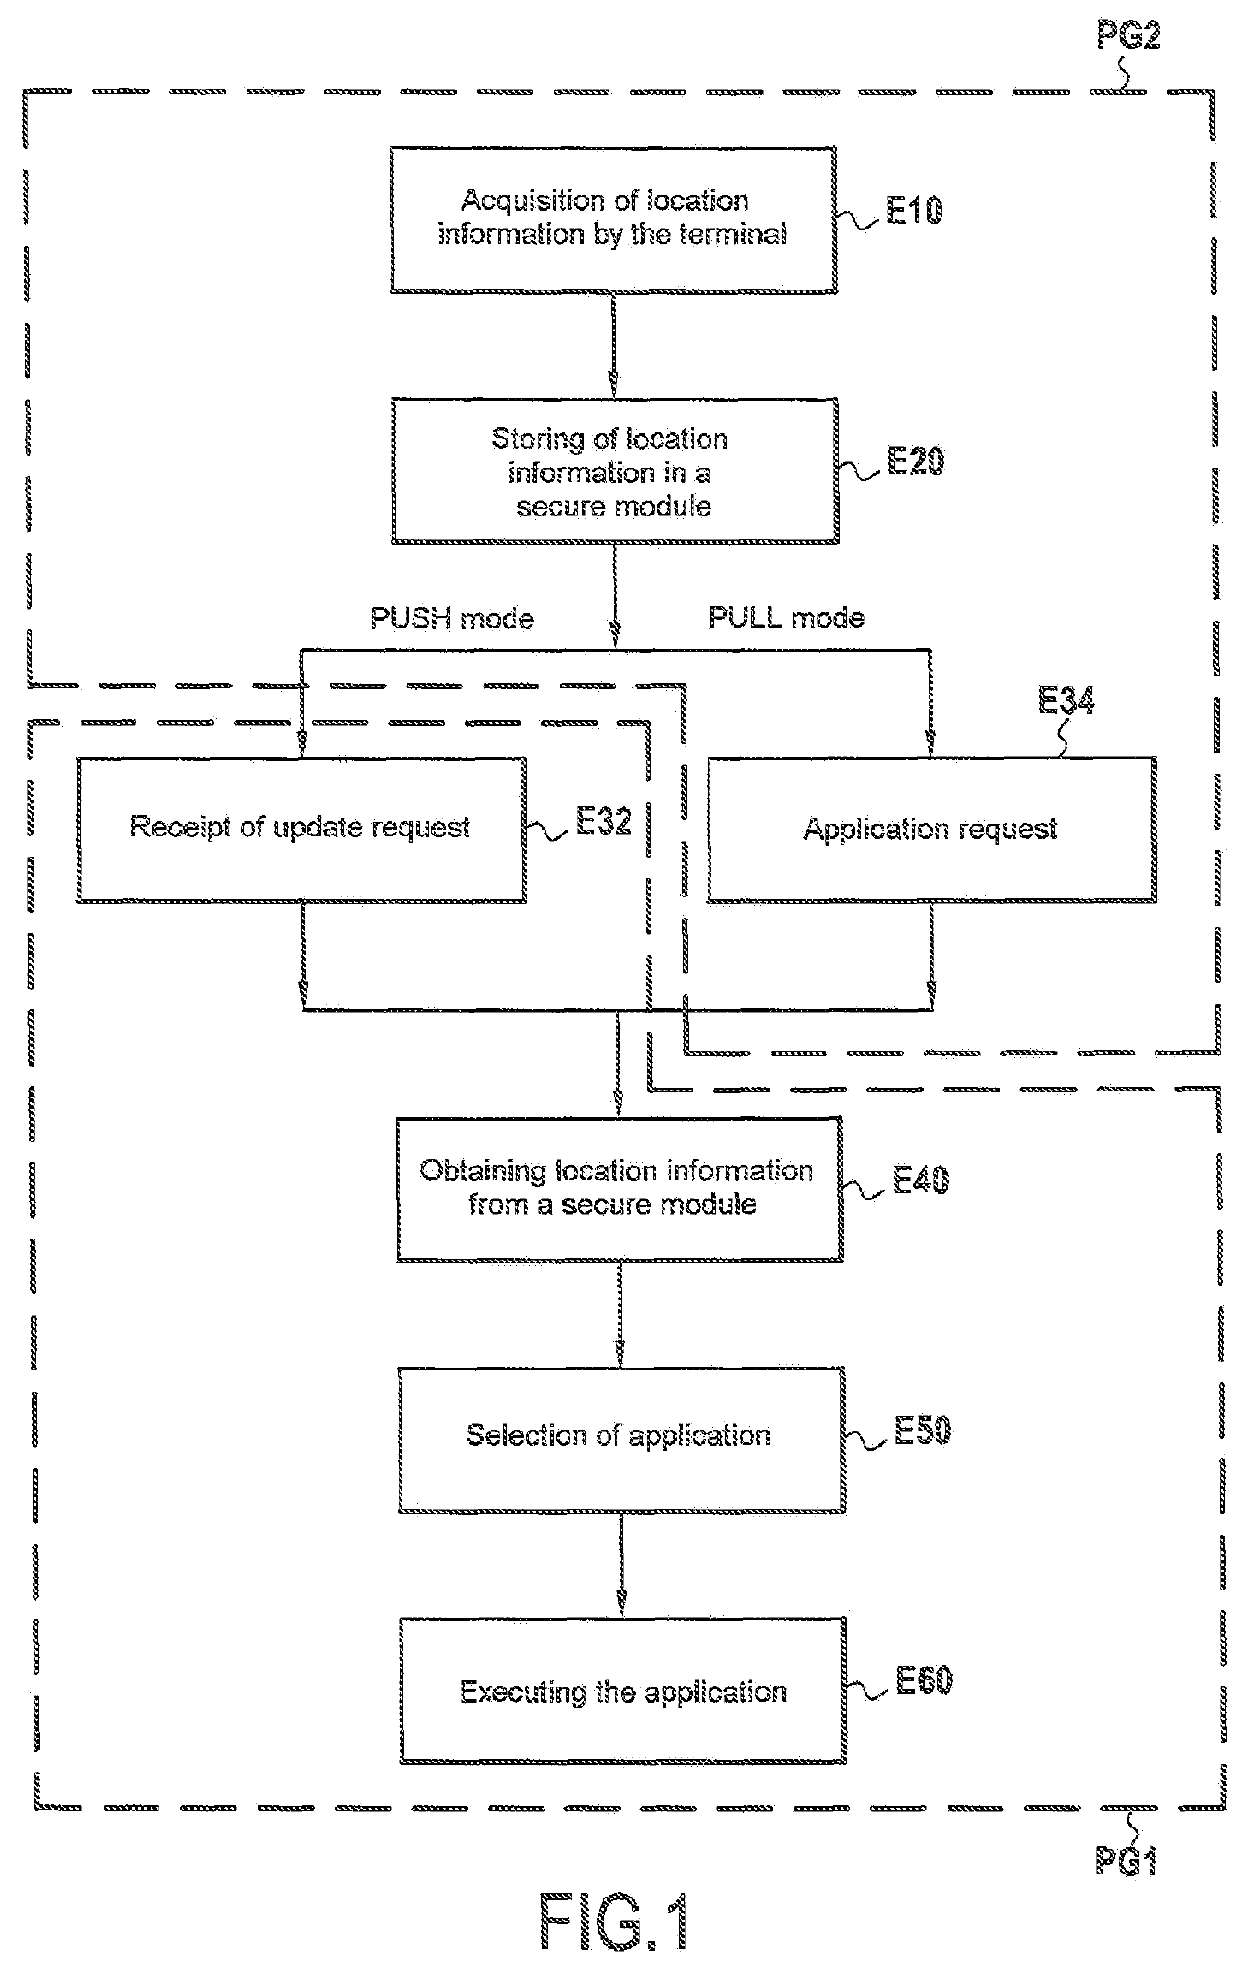 Selection process for an application in a terminal using local information obtained from a secure module